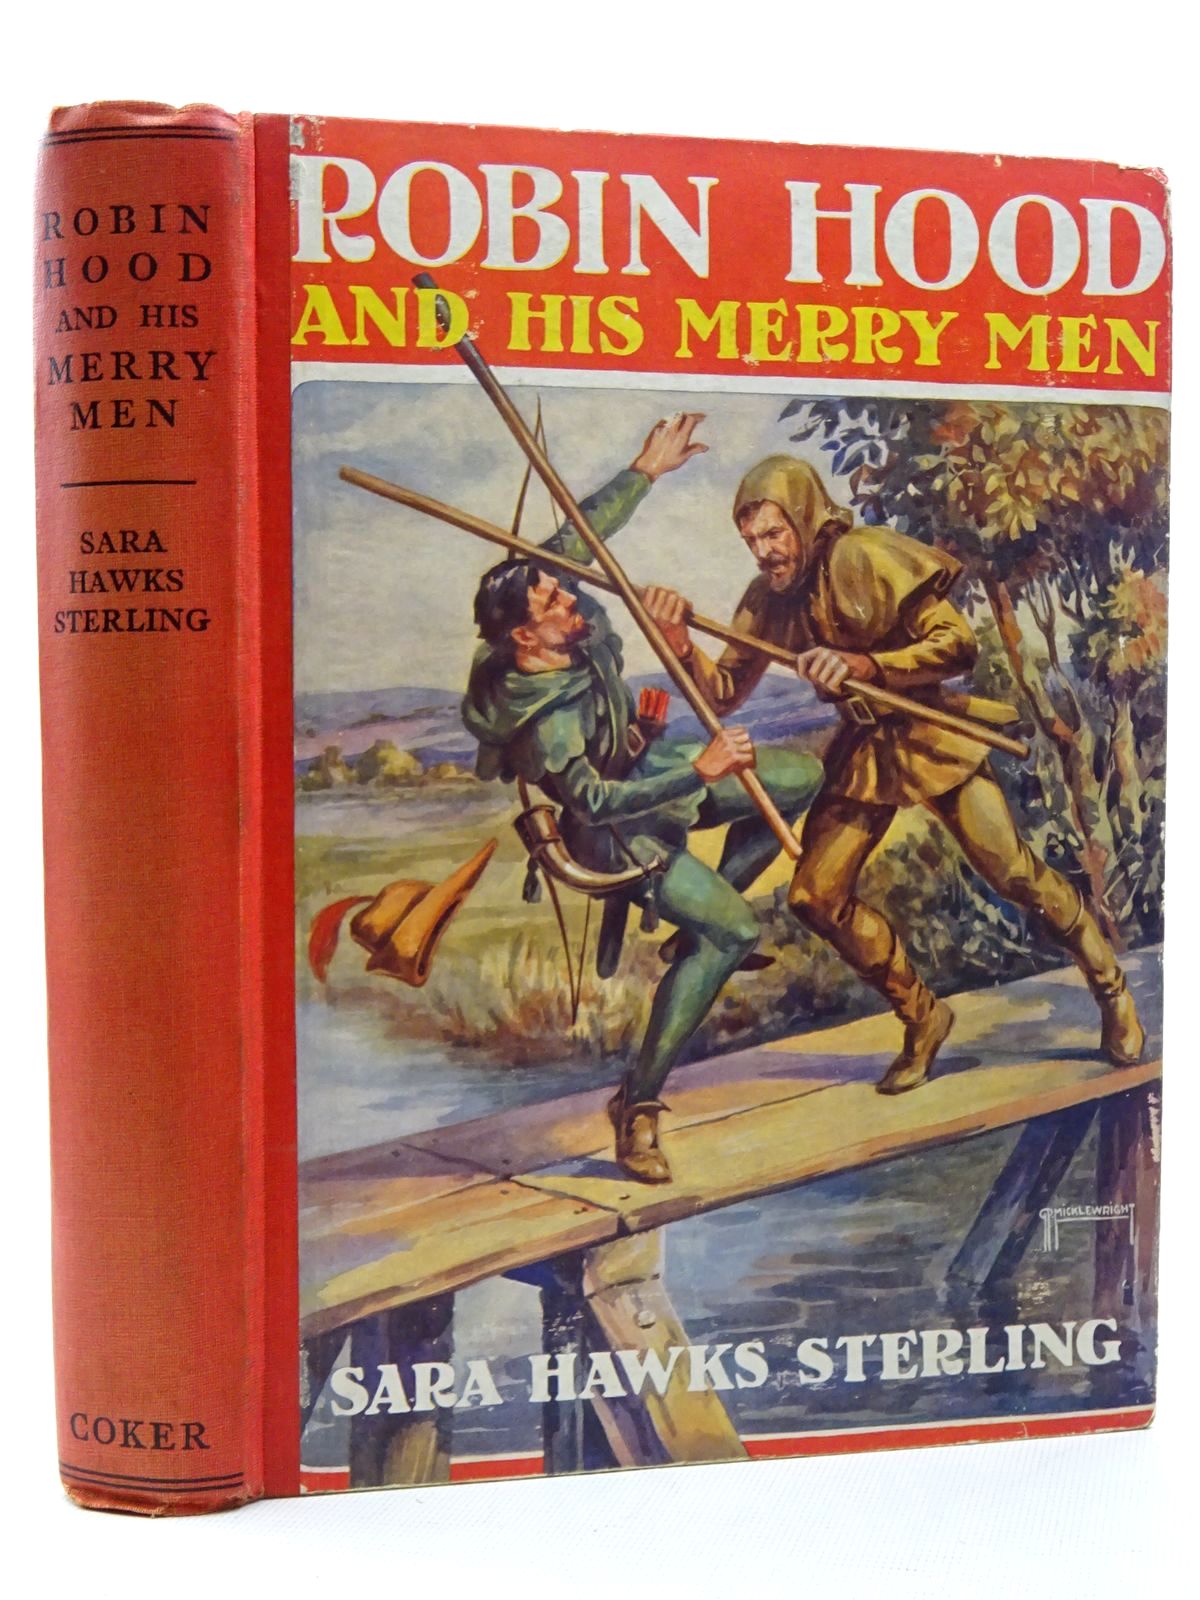 STERLING, SARA HAWKS ILLUSTRATED BY WHEELWRIGHT, ROWLAND - Robin Hood and His Merry Men